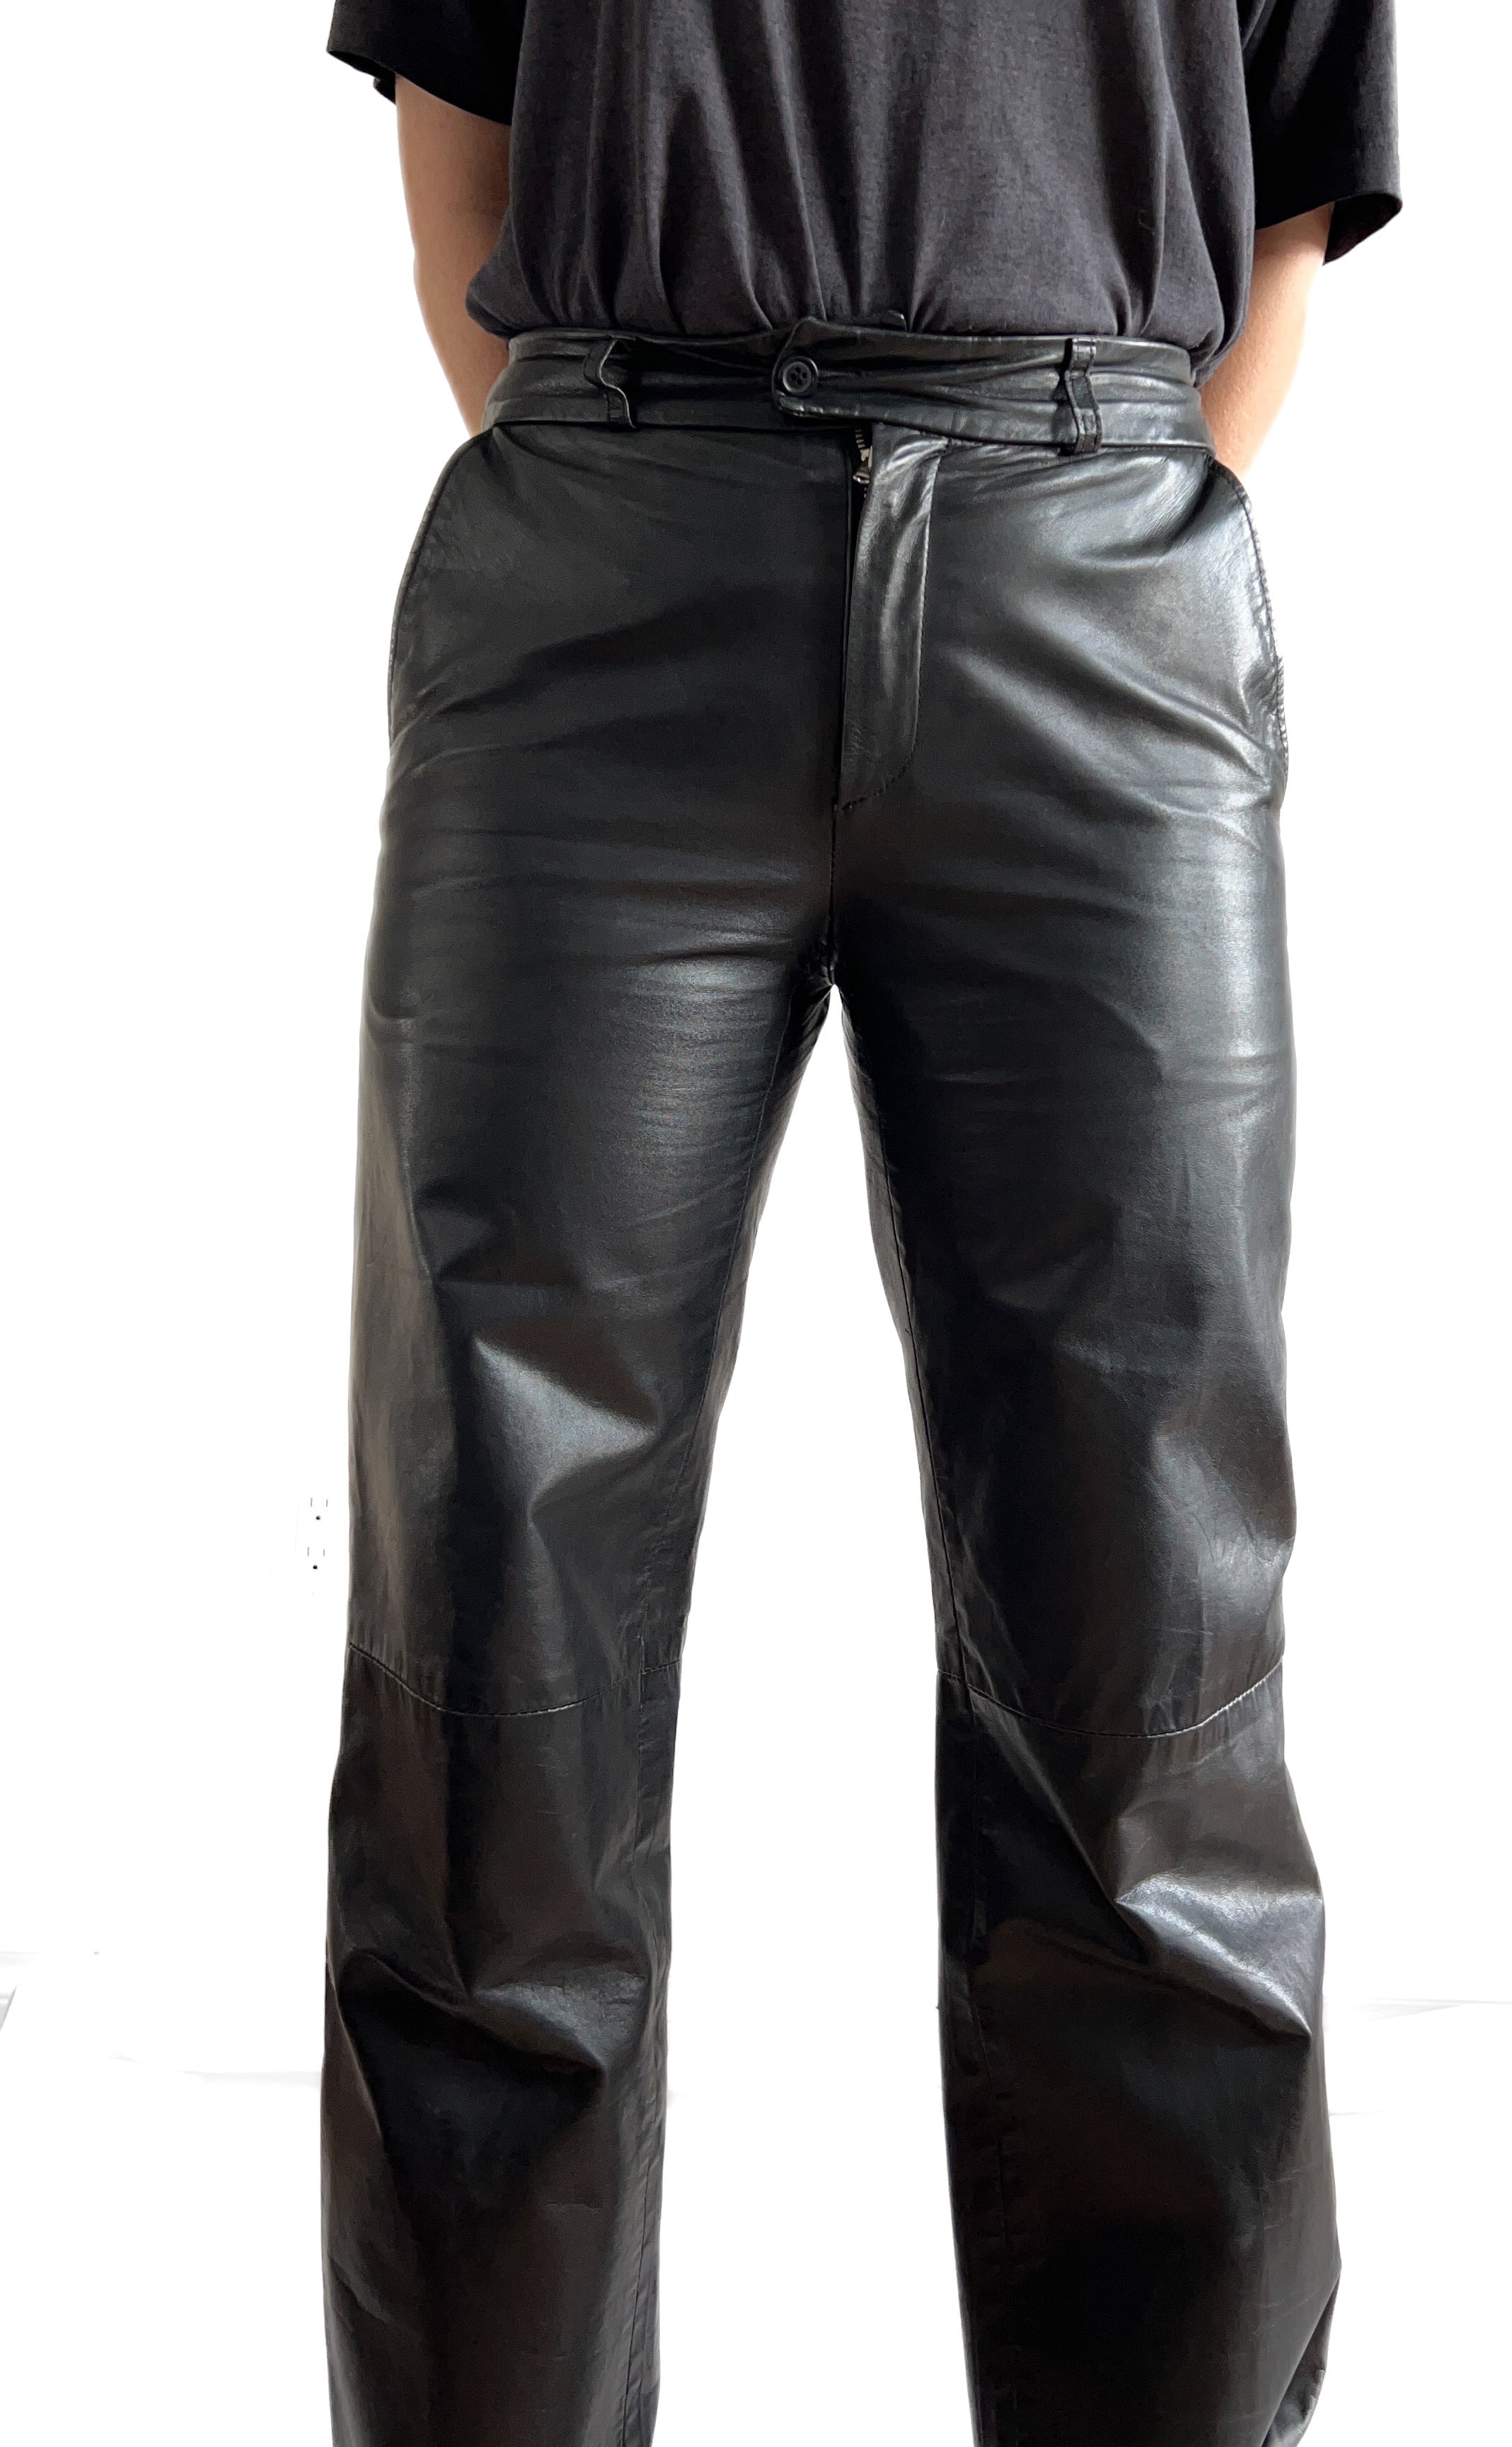 Rudsak Black Leather Trousers, 30" Mid Rise, Soft Leather Pants, Made in Canada